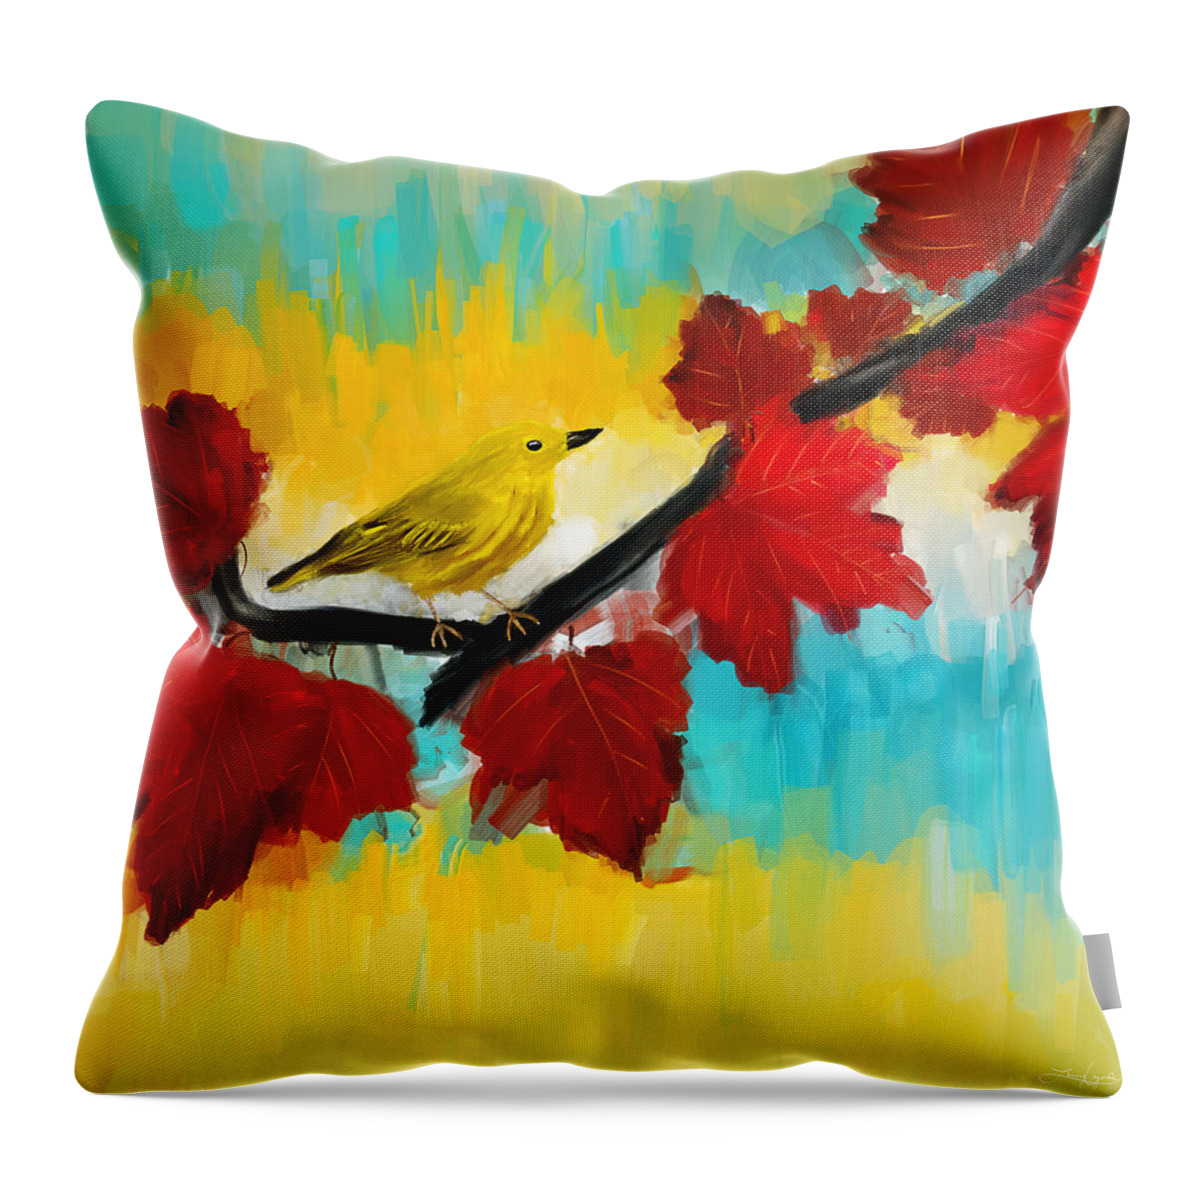 Yellow Throw Pillow featuring the painting Vividness by Lourry Legarde